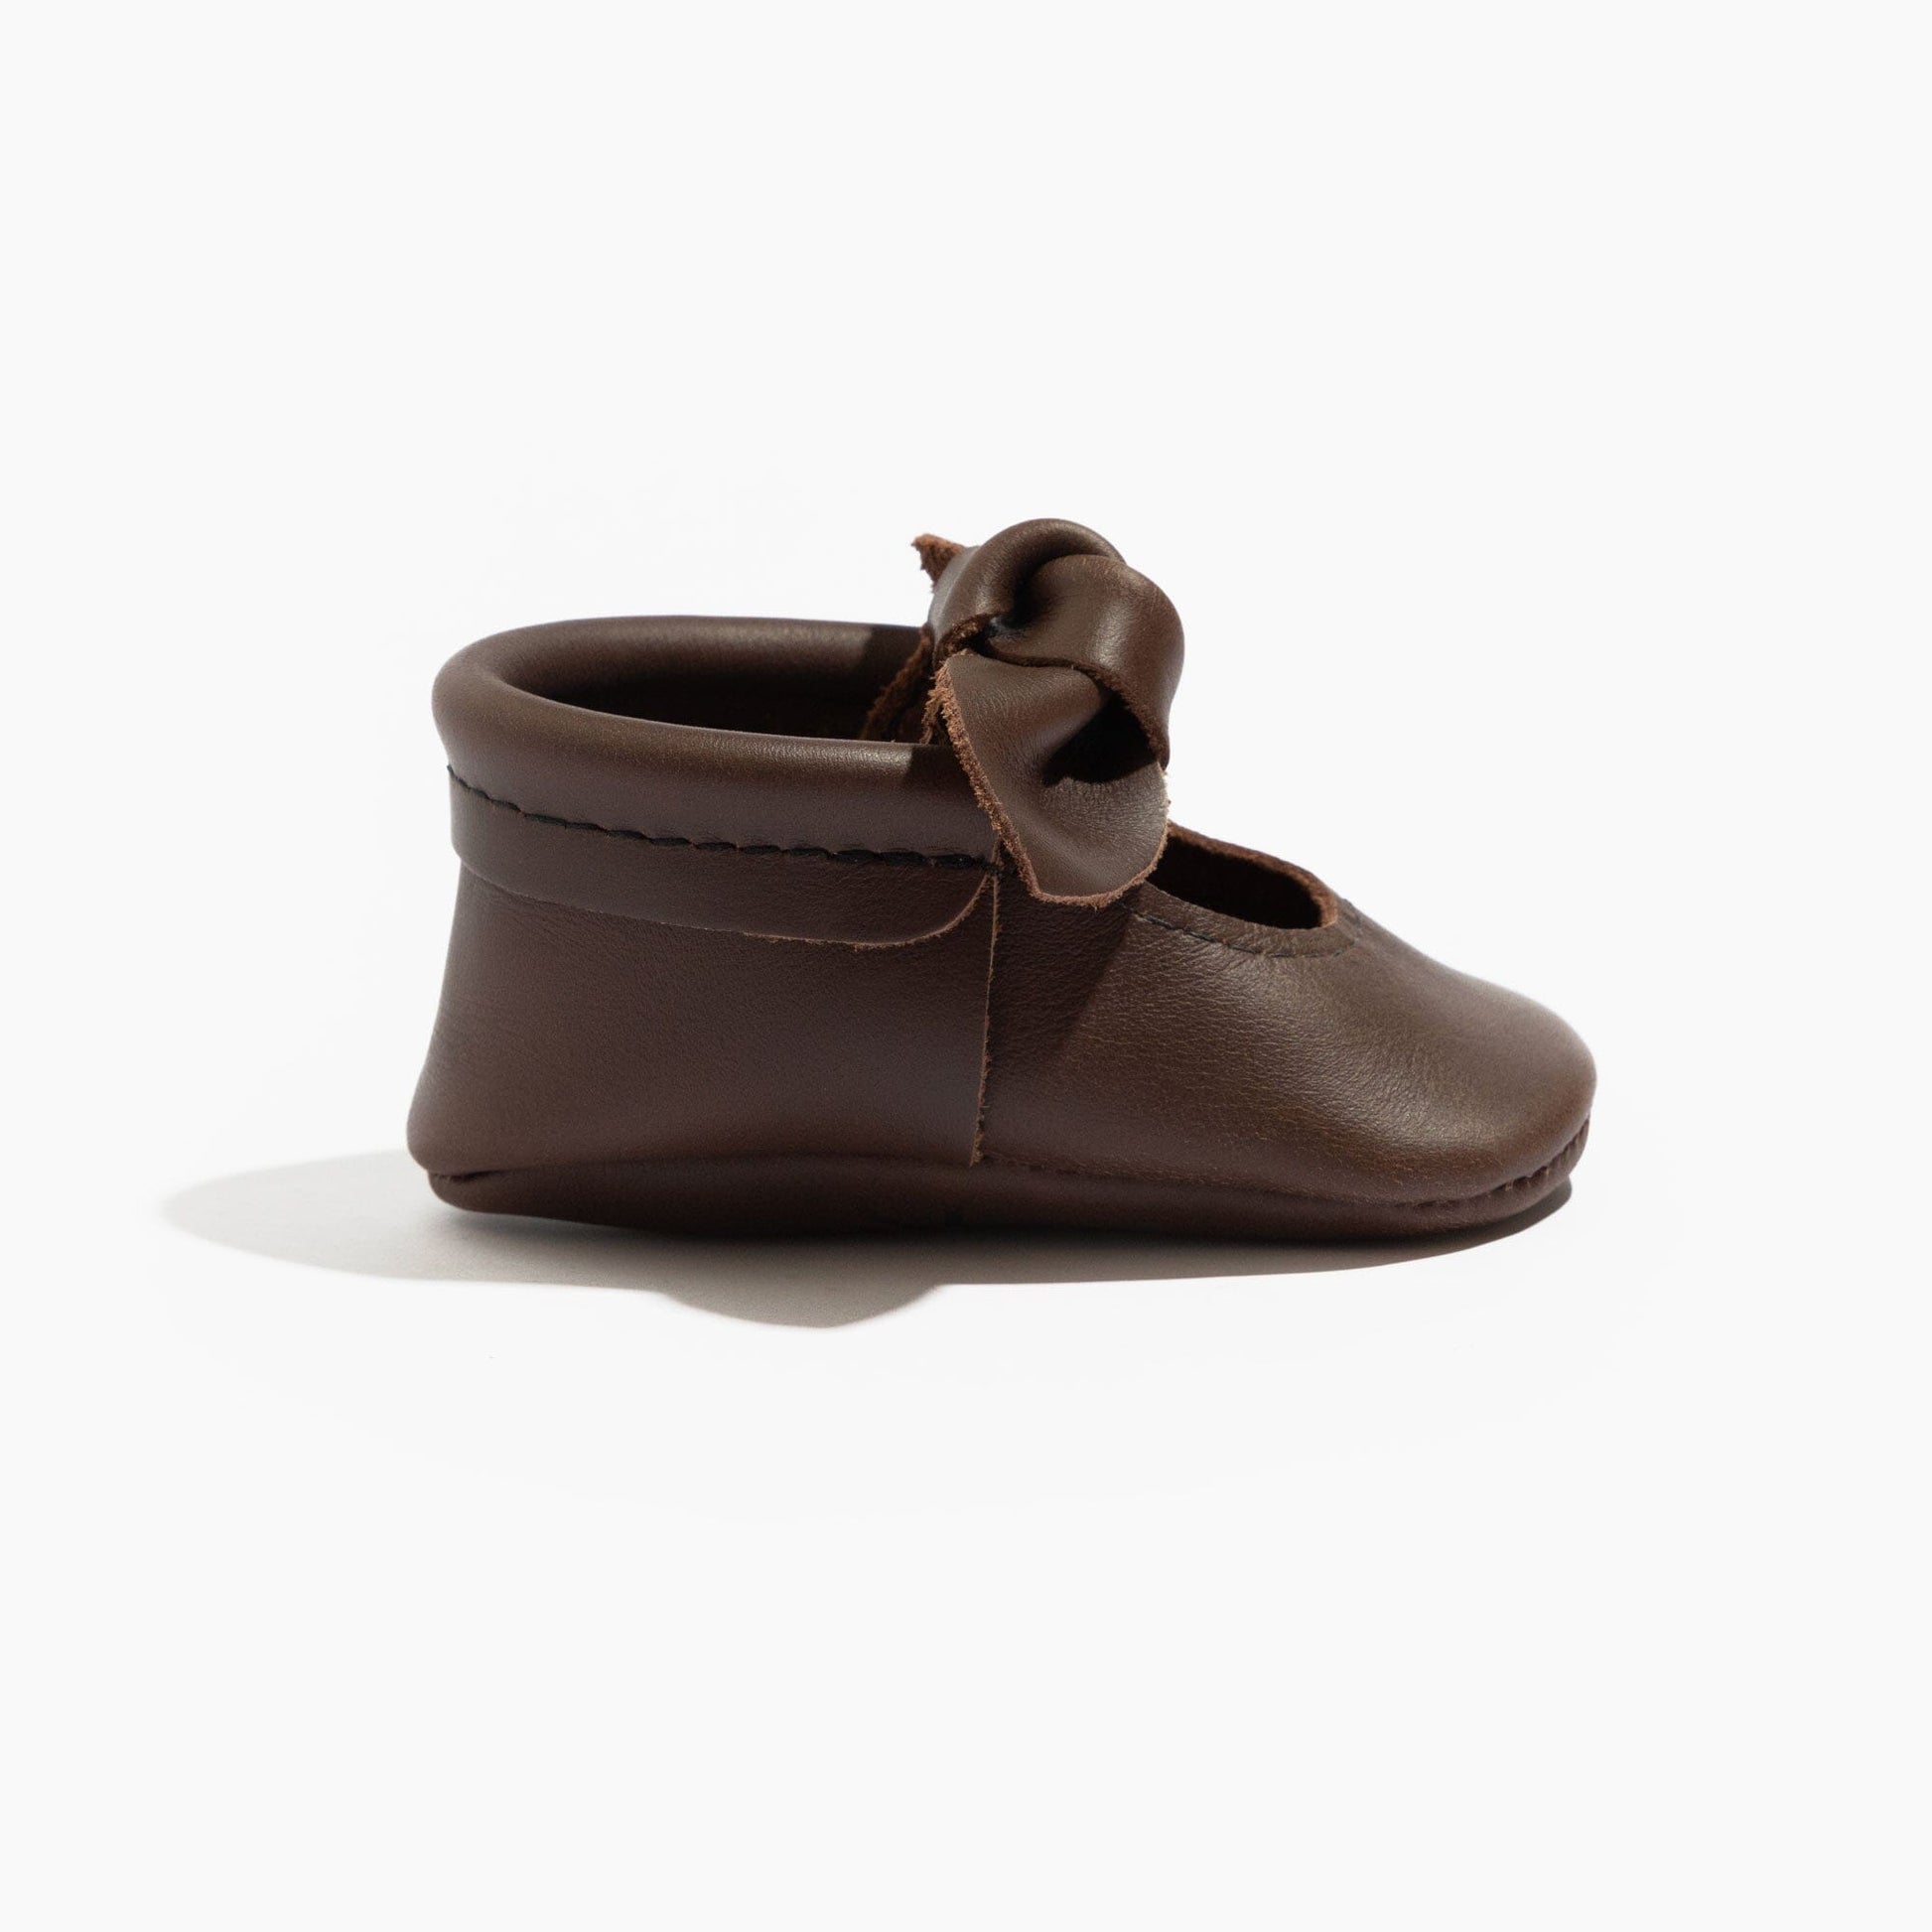 Espresso Knotted Bow Mocc Knotted Bow Mocc Soft Sole 